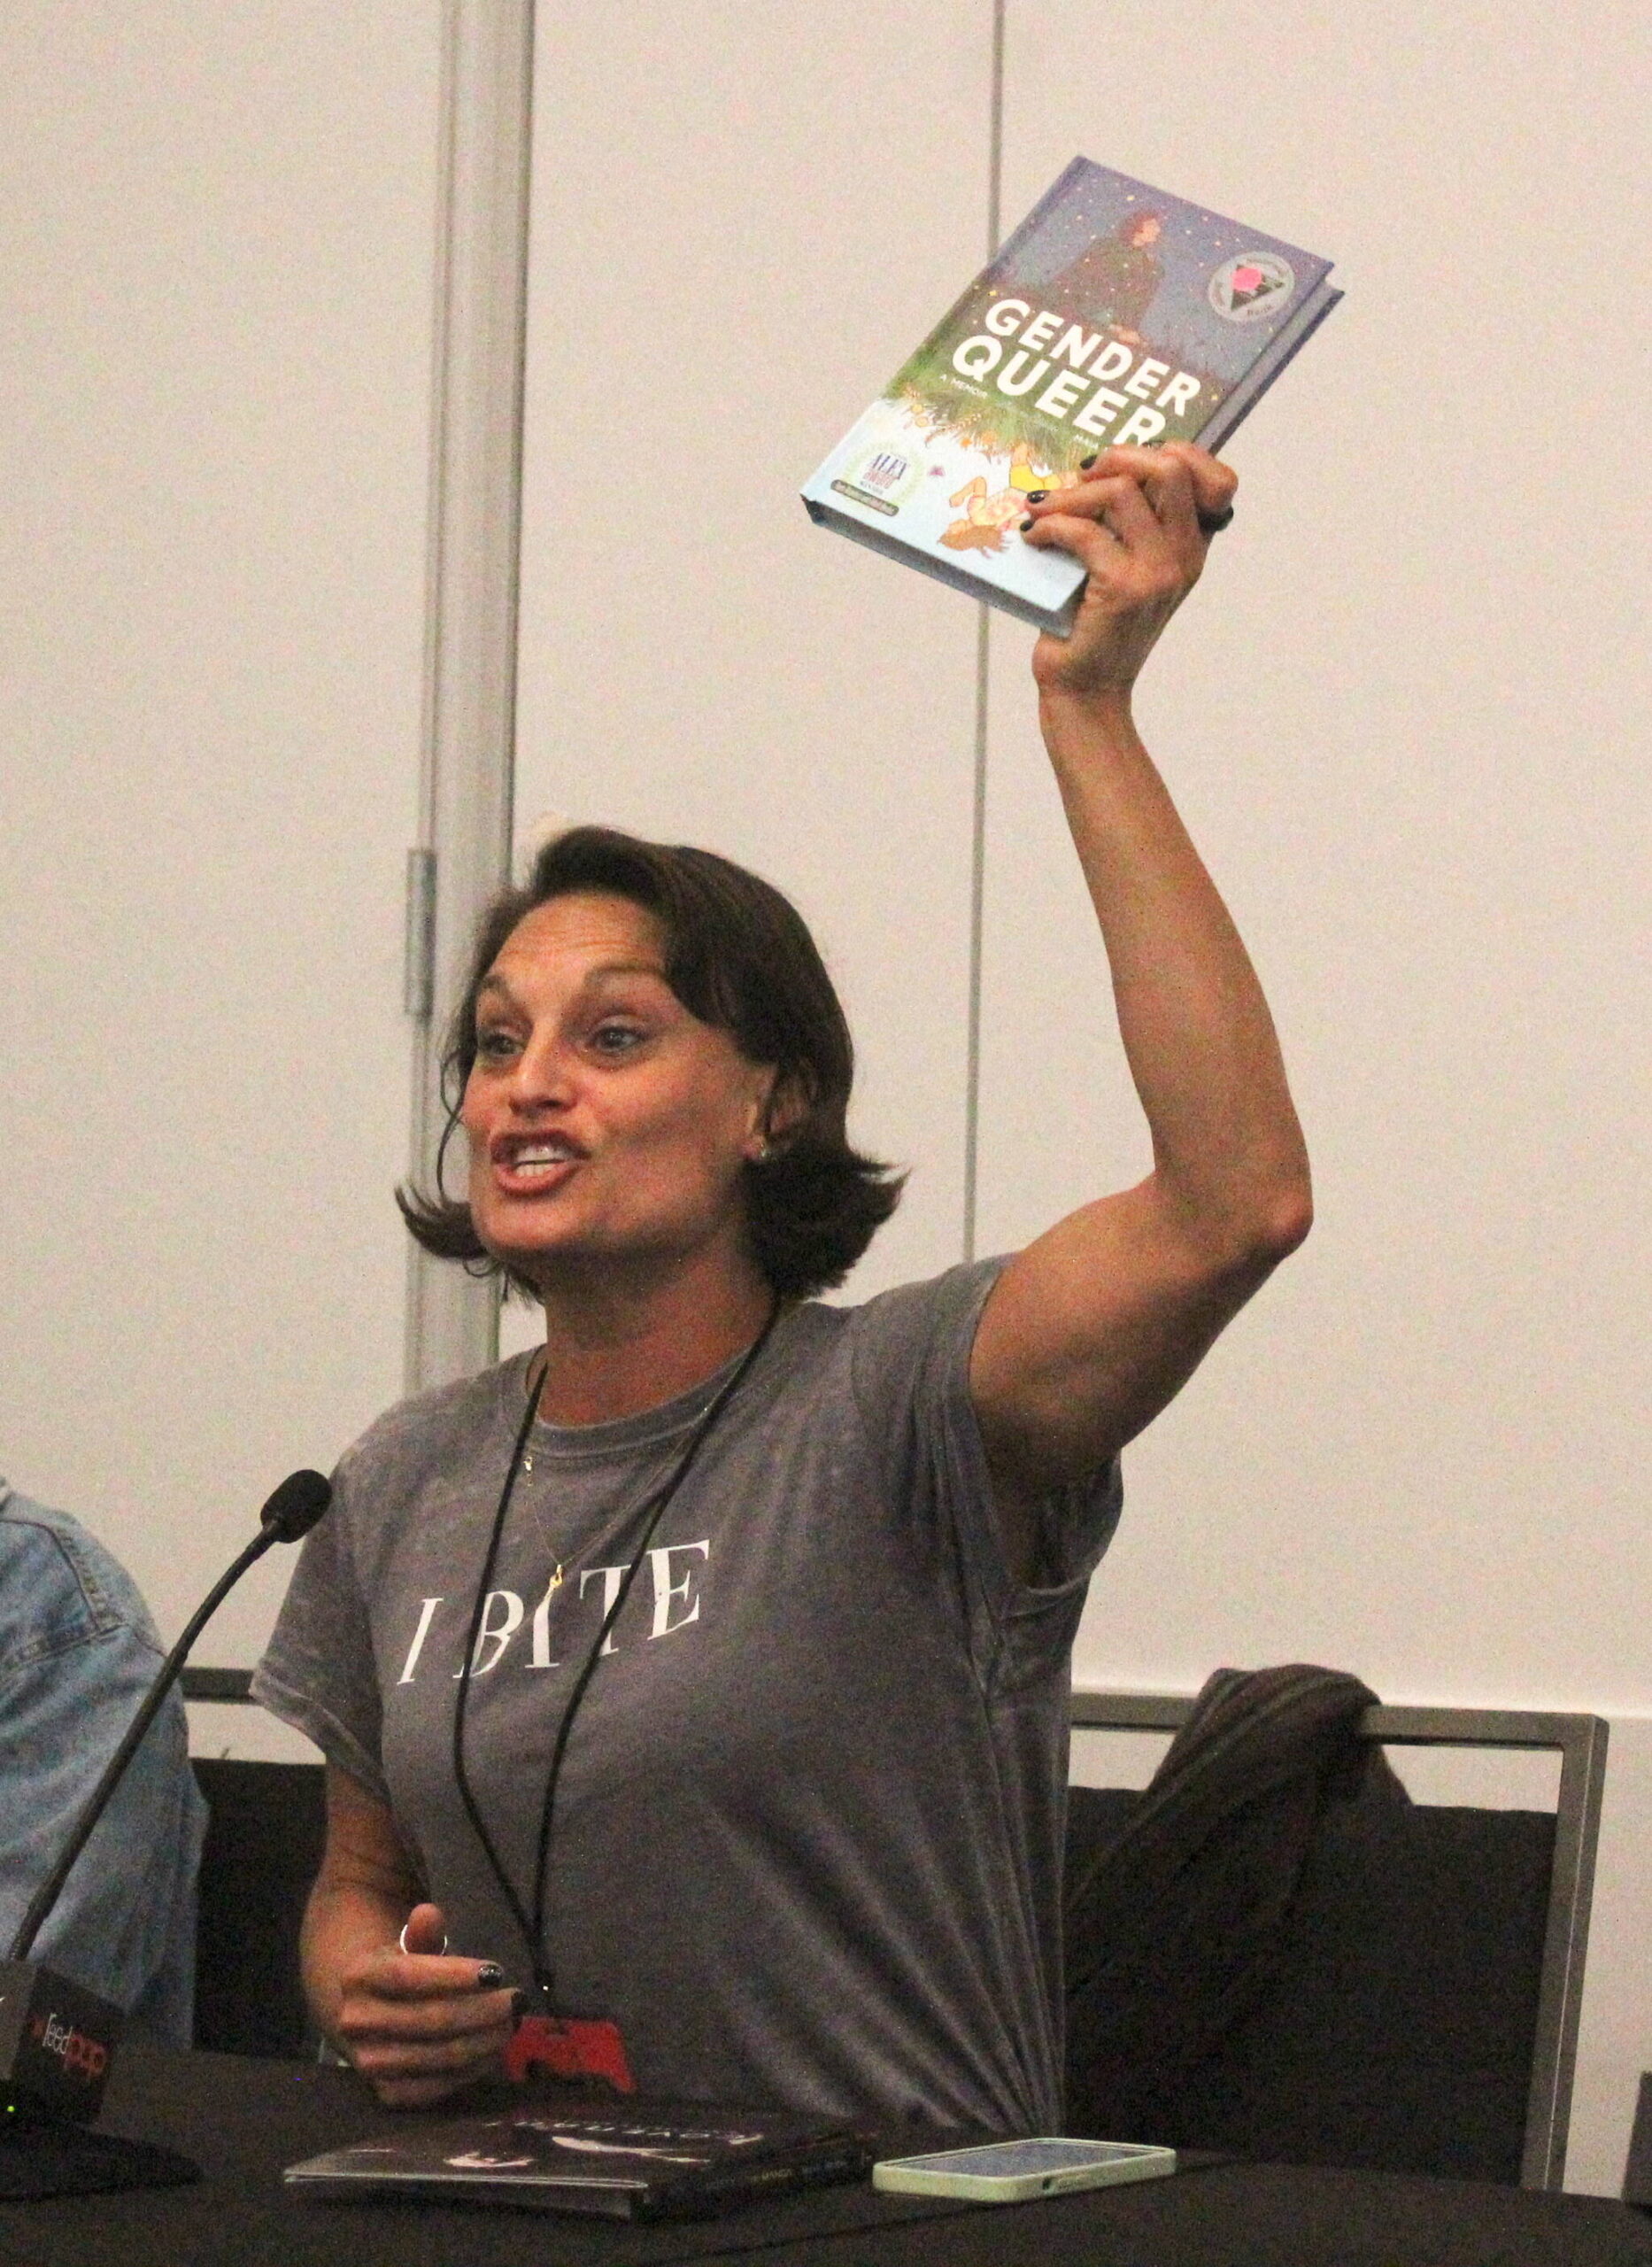 Writer Olivia Cuartero-Briggs holds up “Gender Queer: A Memoir” by Maia Kobabe, the most banned book in the United States, during an ECCC 2024 panel about banned books. Photo by Bailey Jo Josie/Sound Publishing